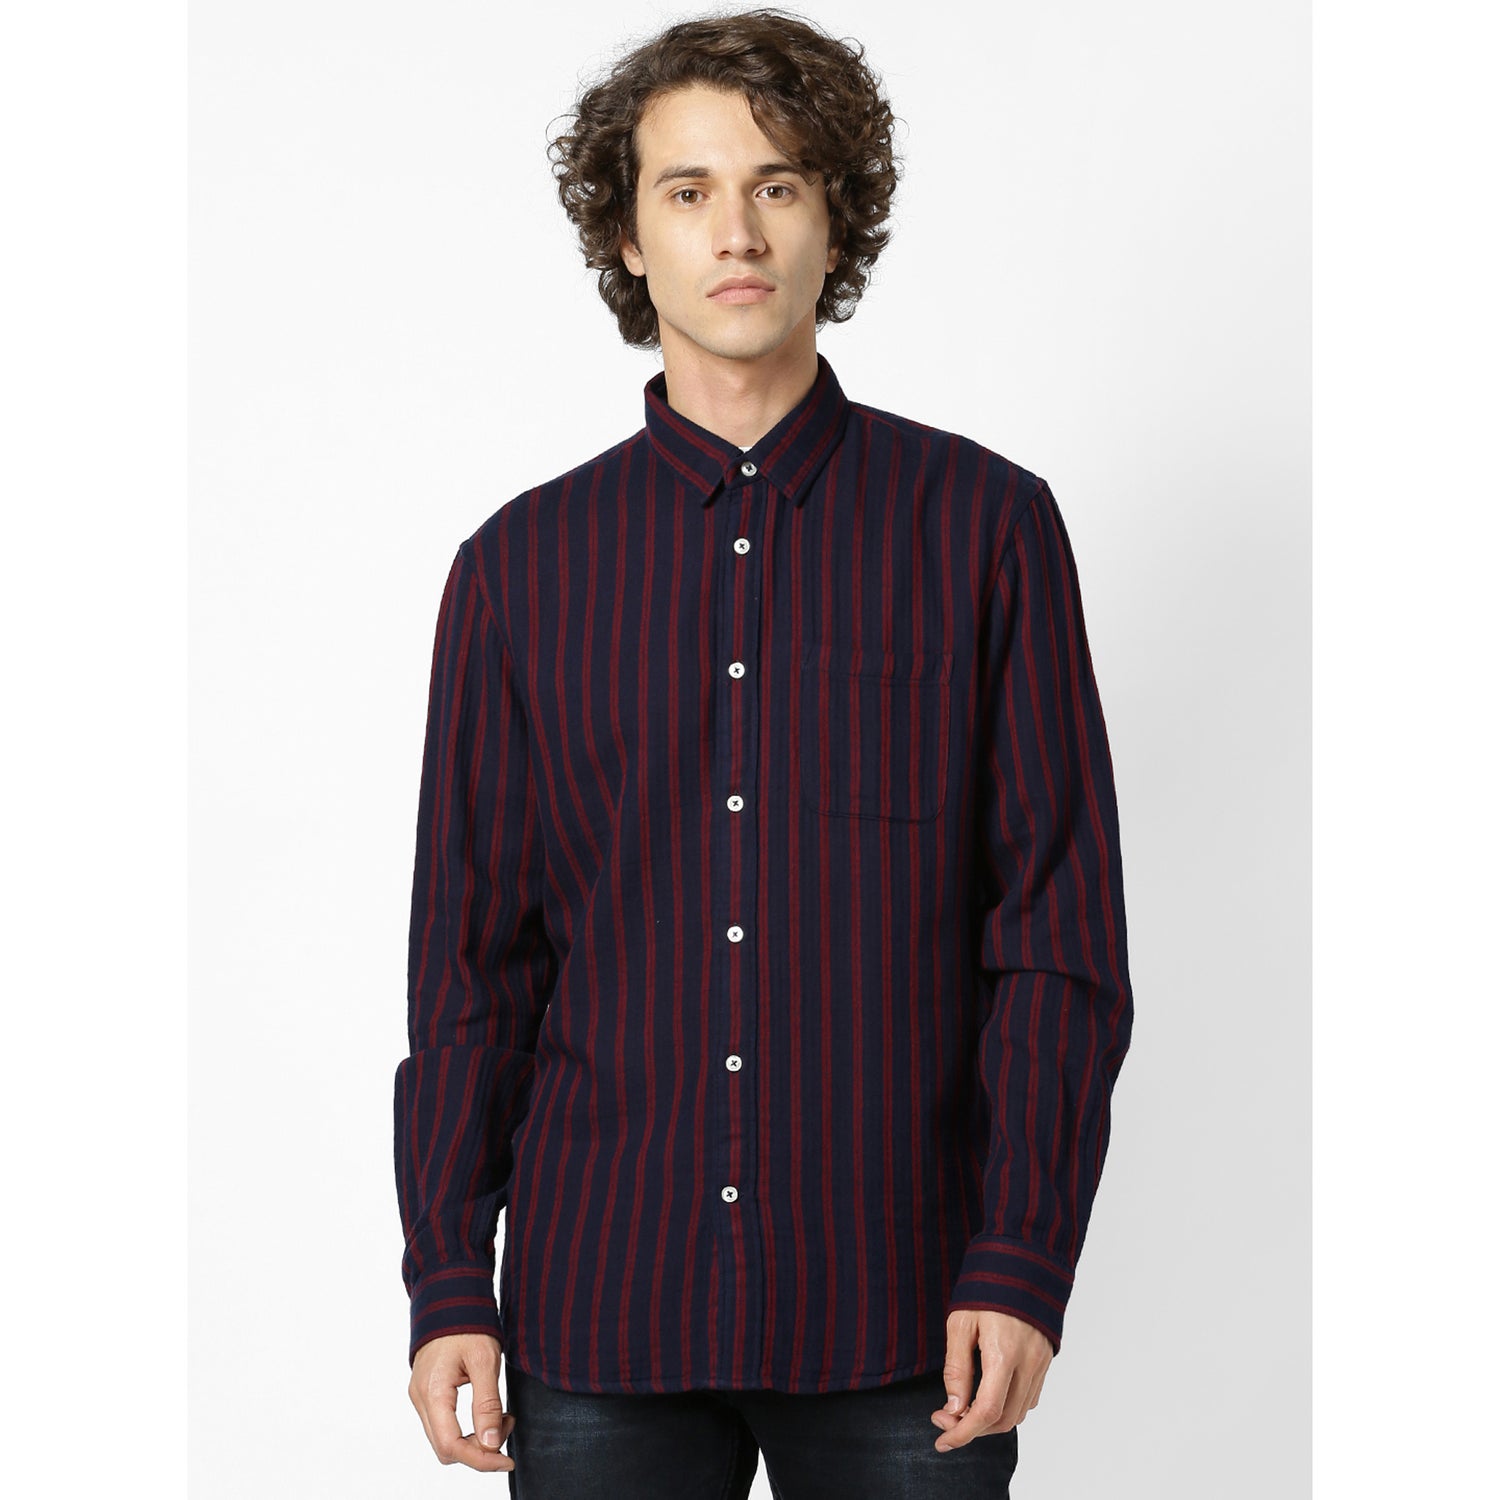 Navy Blue and Red Regular Fit Striped Cotton Casual Shirt (SALIGNE)